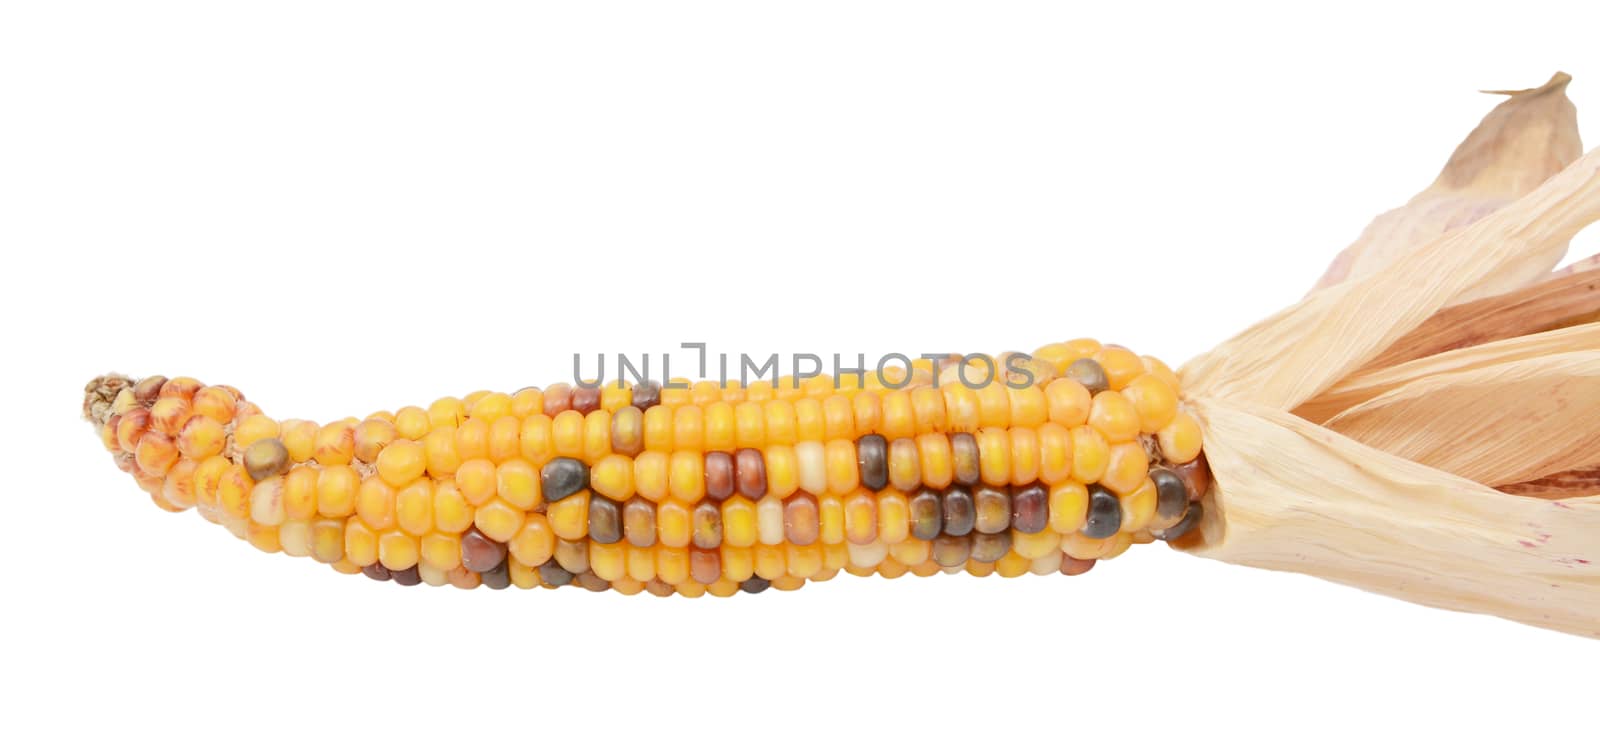 Decorative sweetcorn with yellow, red and black niblets. Papery dried husks drawn back, on a white background